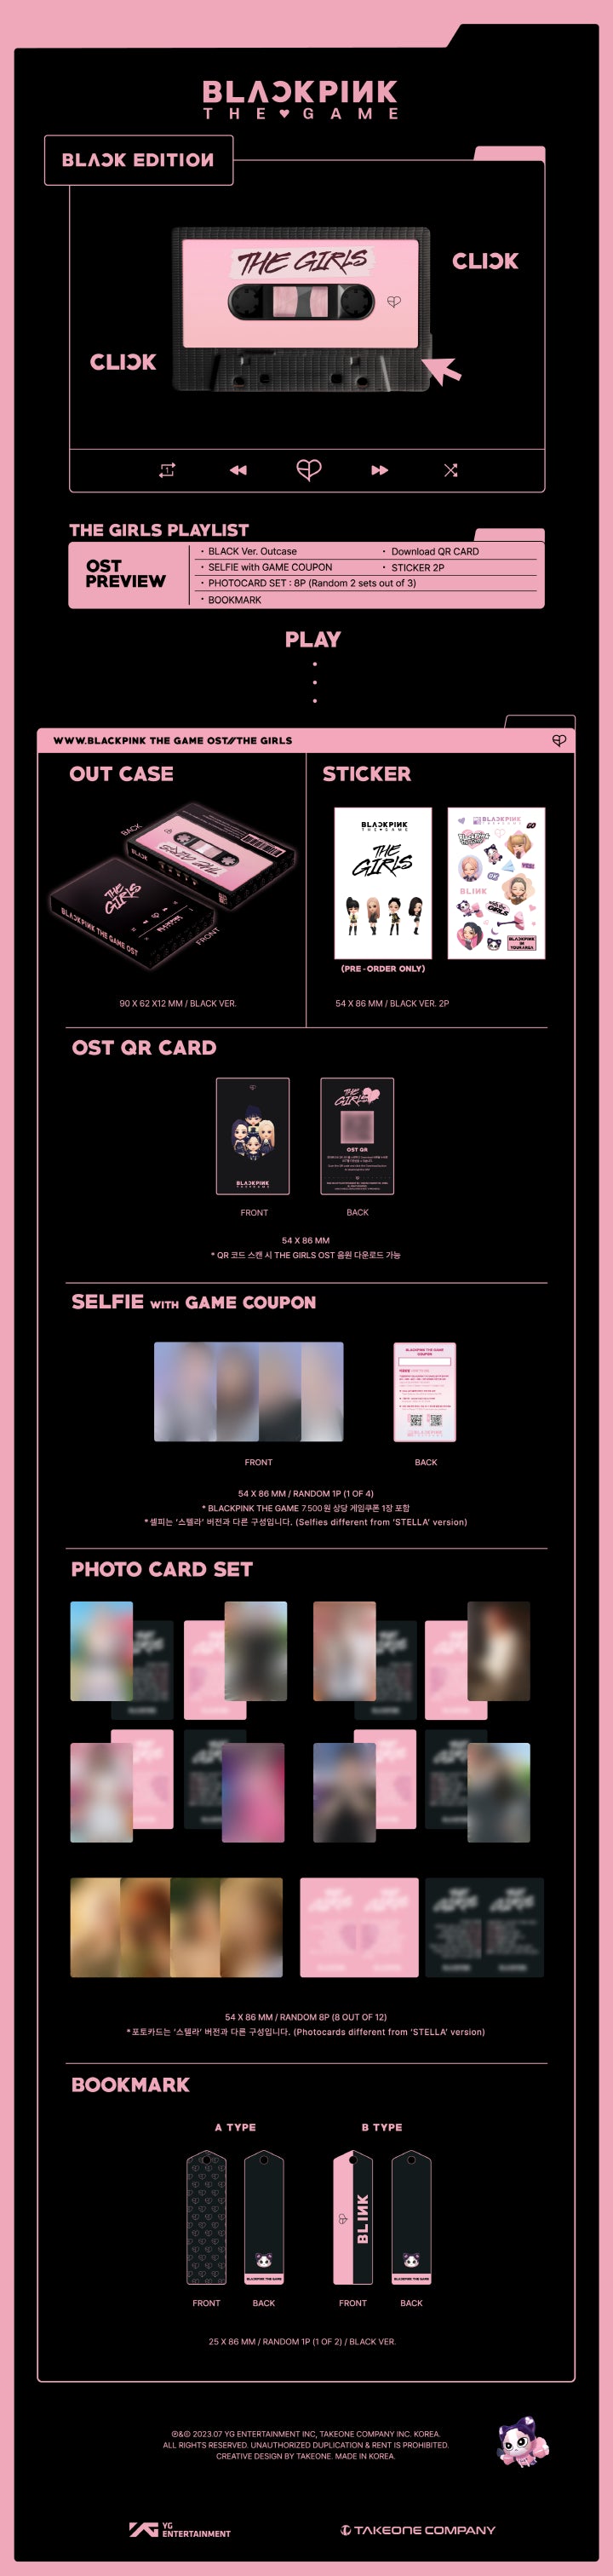 1 OST QR Card
1 Selfie with Game Coupon
8 Photo Cards (random out of 12 types)
1 Bookmark (random out of 2 types)